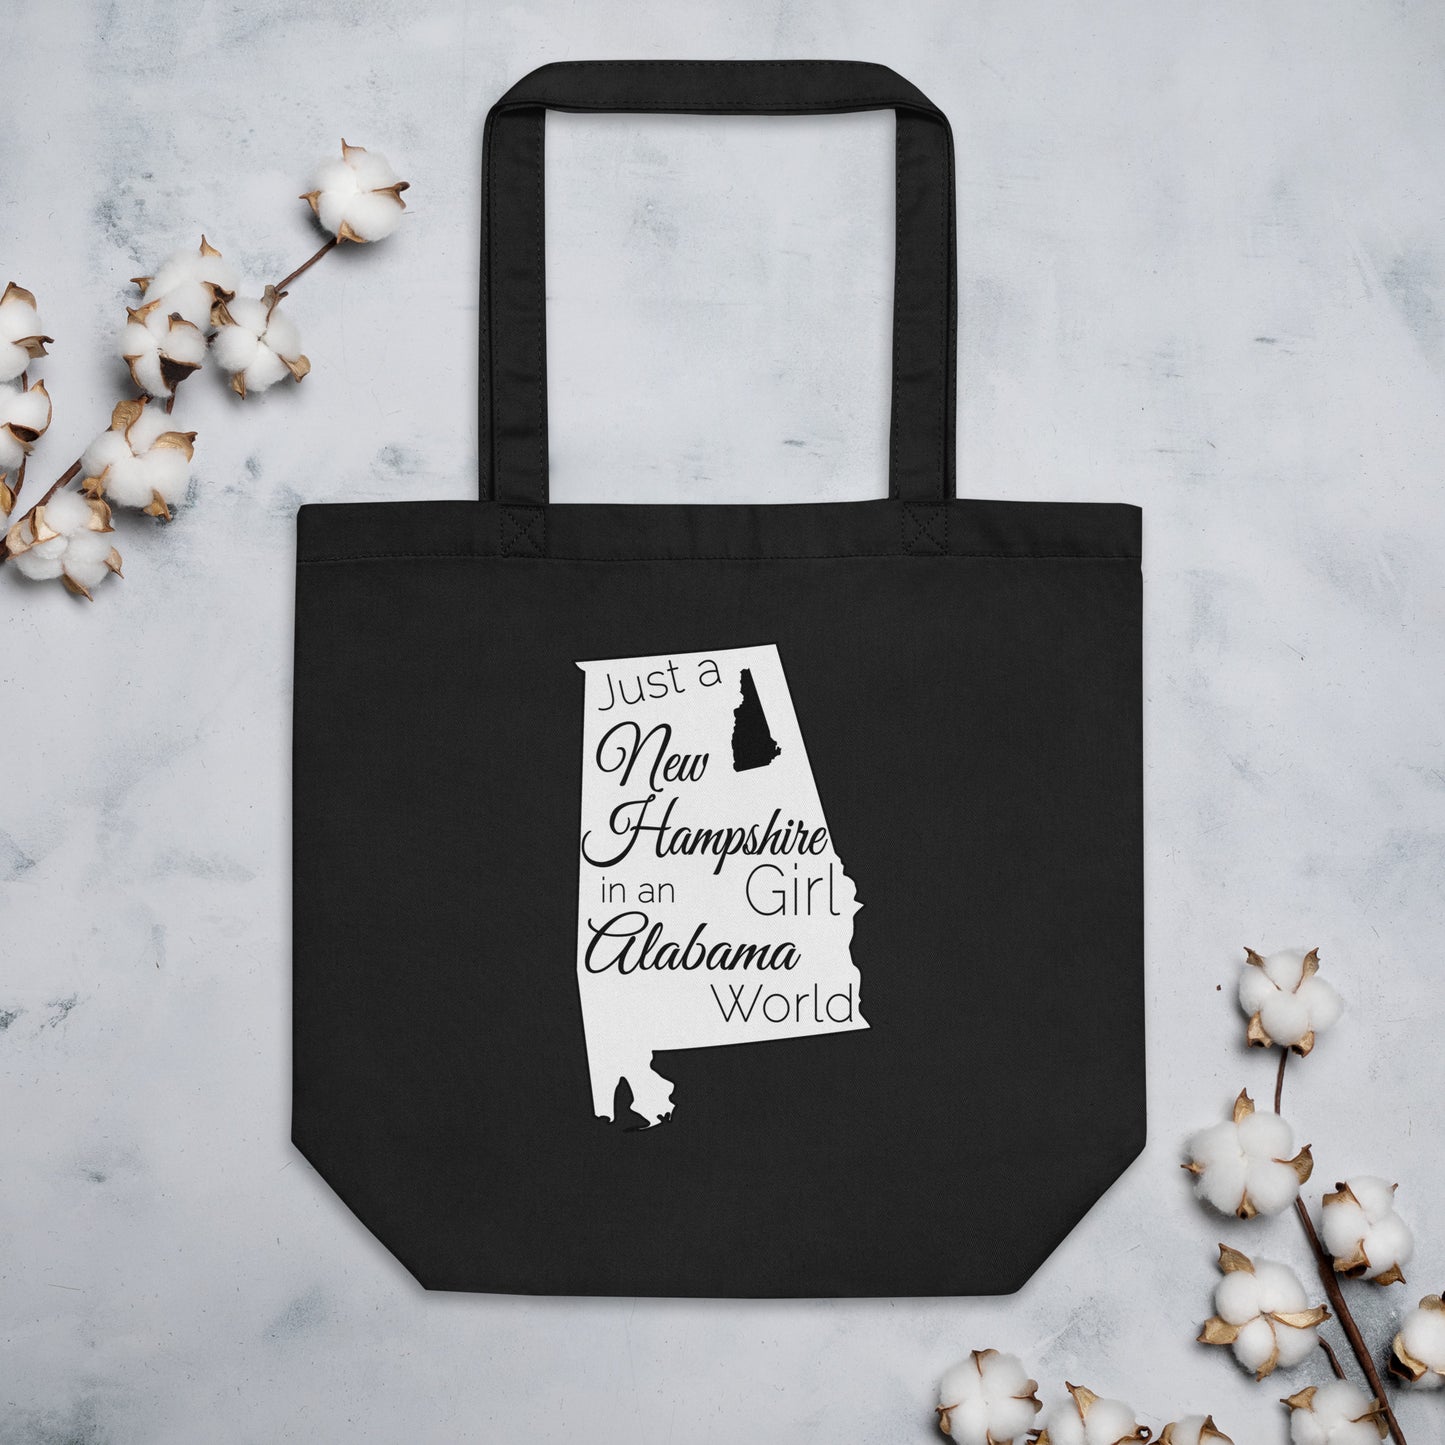 Just a New Hampshire Girl in an Alabama World Eco Tote Bag